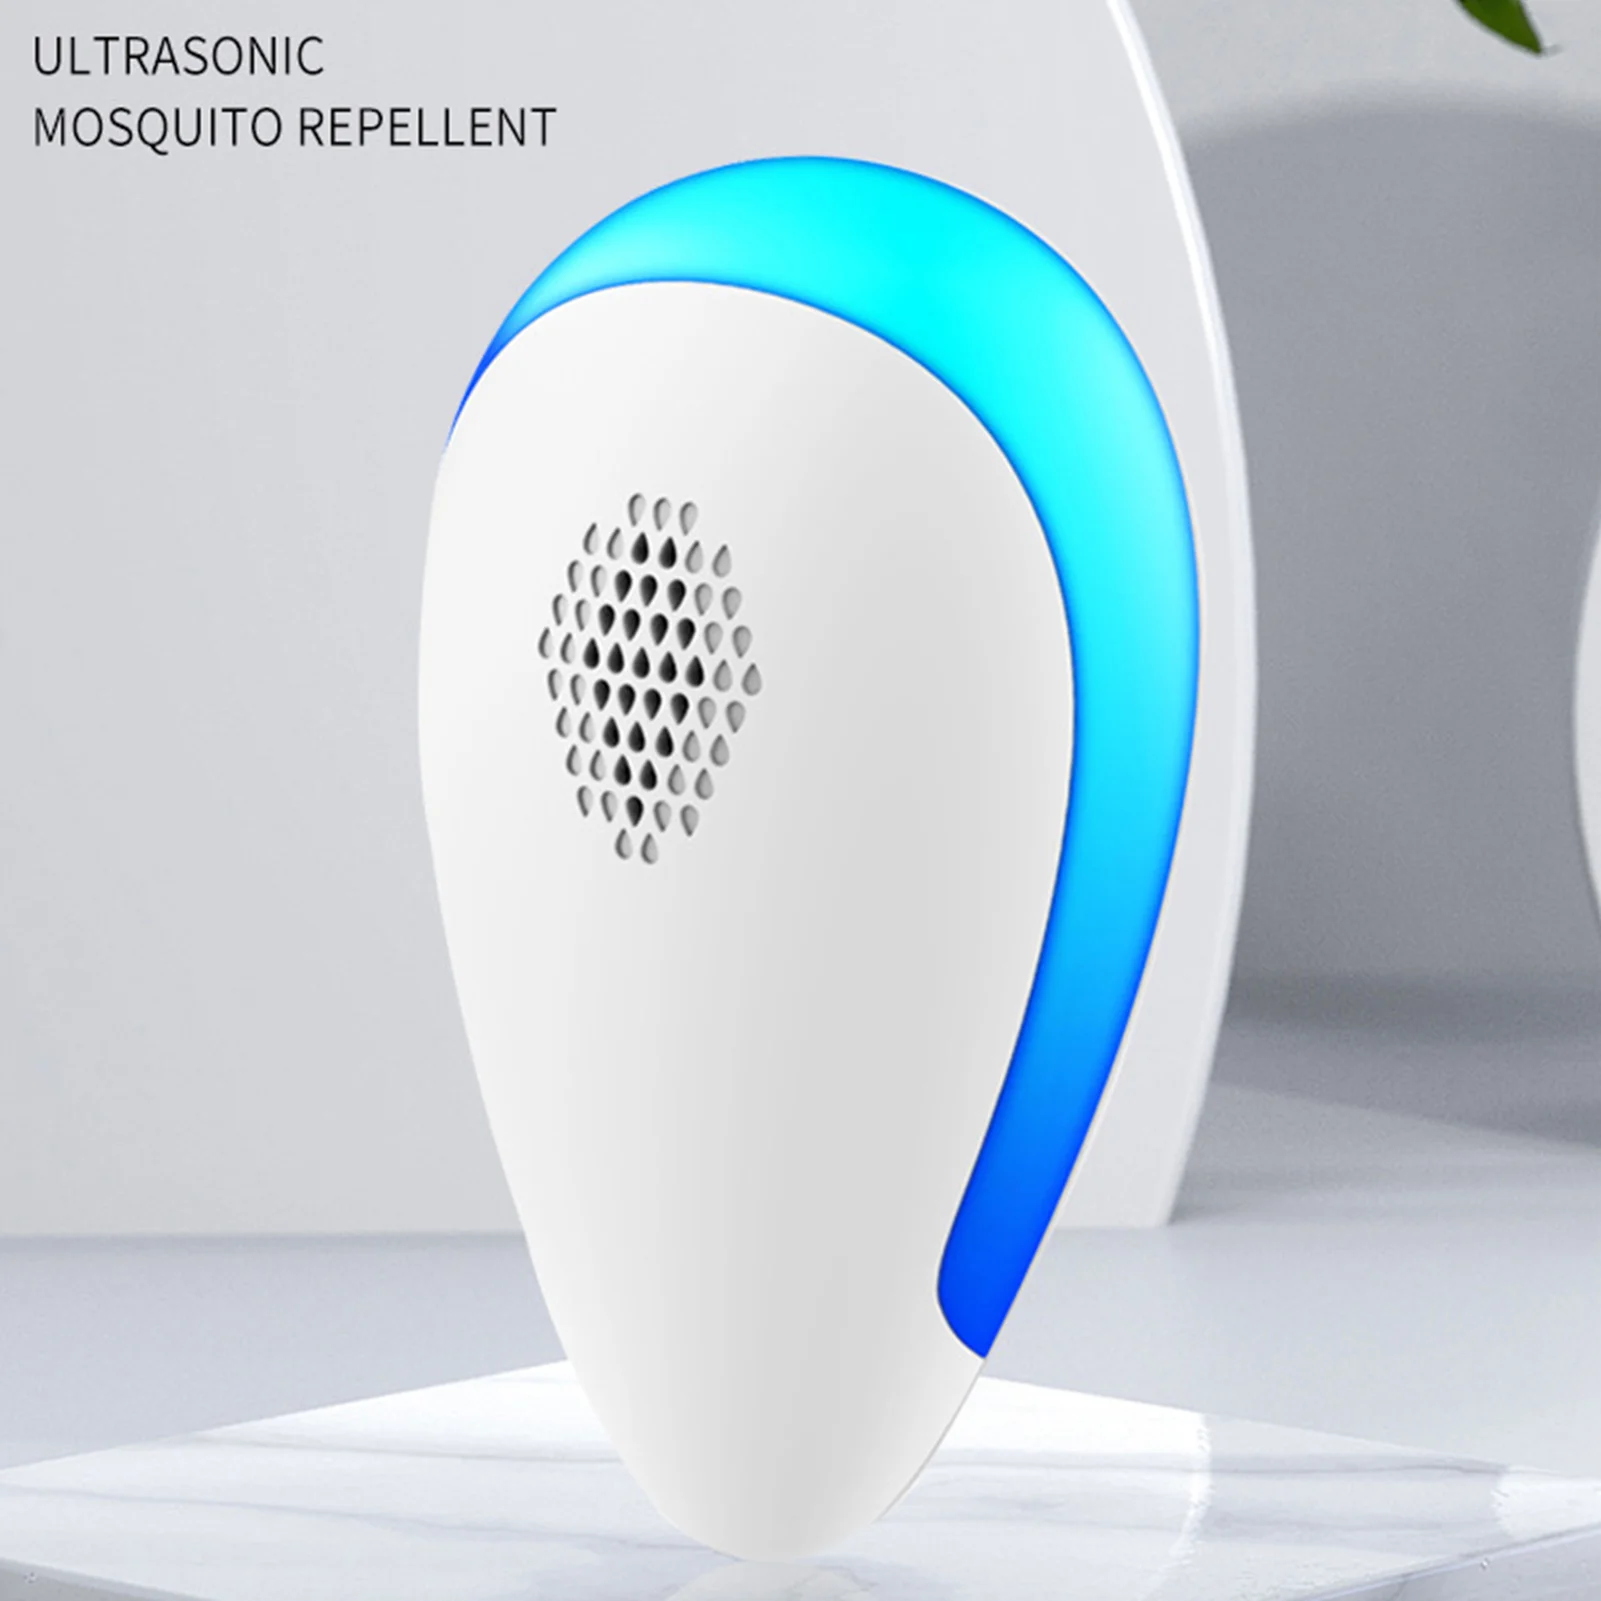 

1PCS Electric Ultrasonic Pest Repeller Anti Mosquito Rodent Control Bug Cockroach Insect Repellent Mosquito Killer EU/US/UK Plug